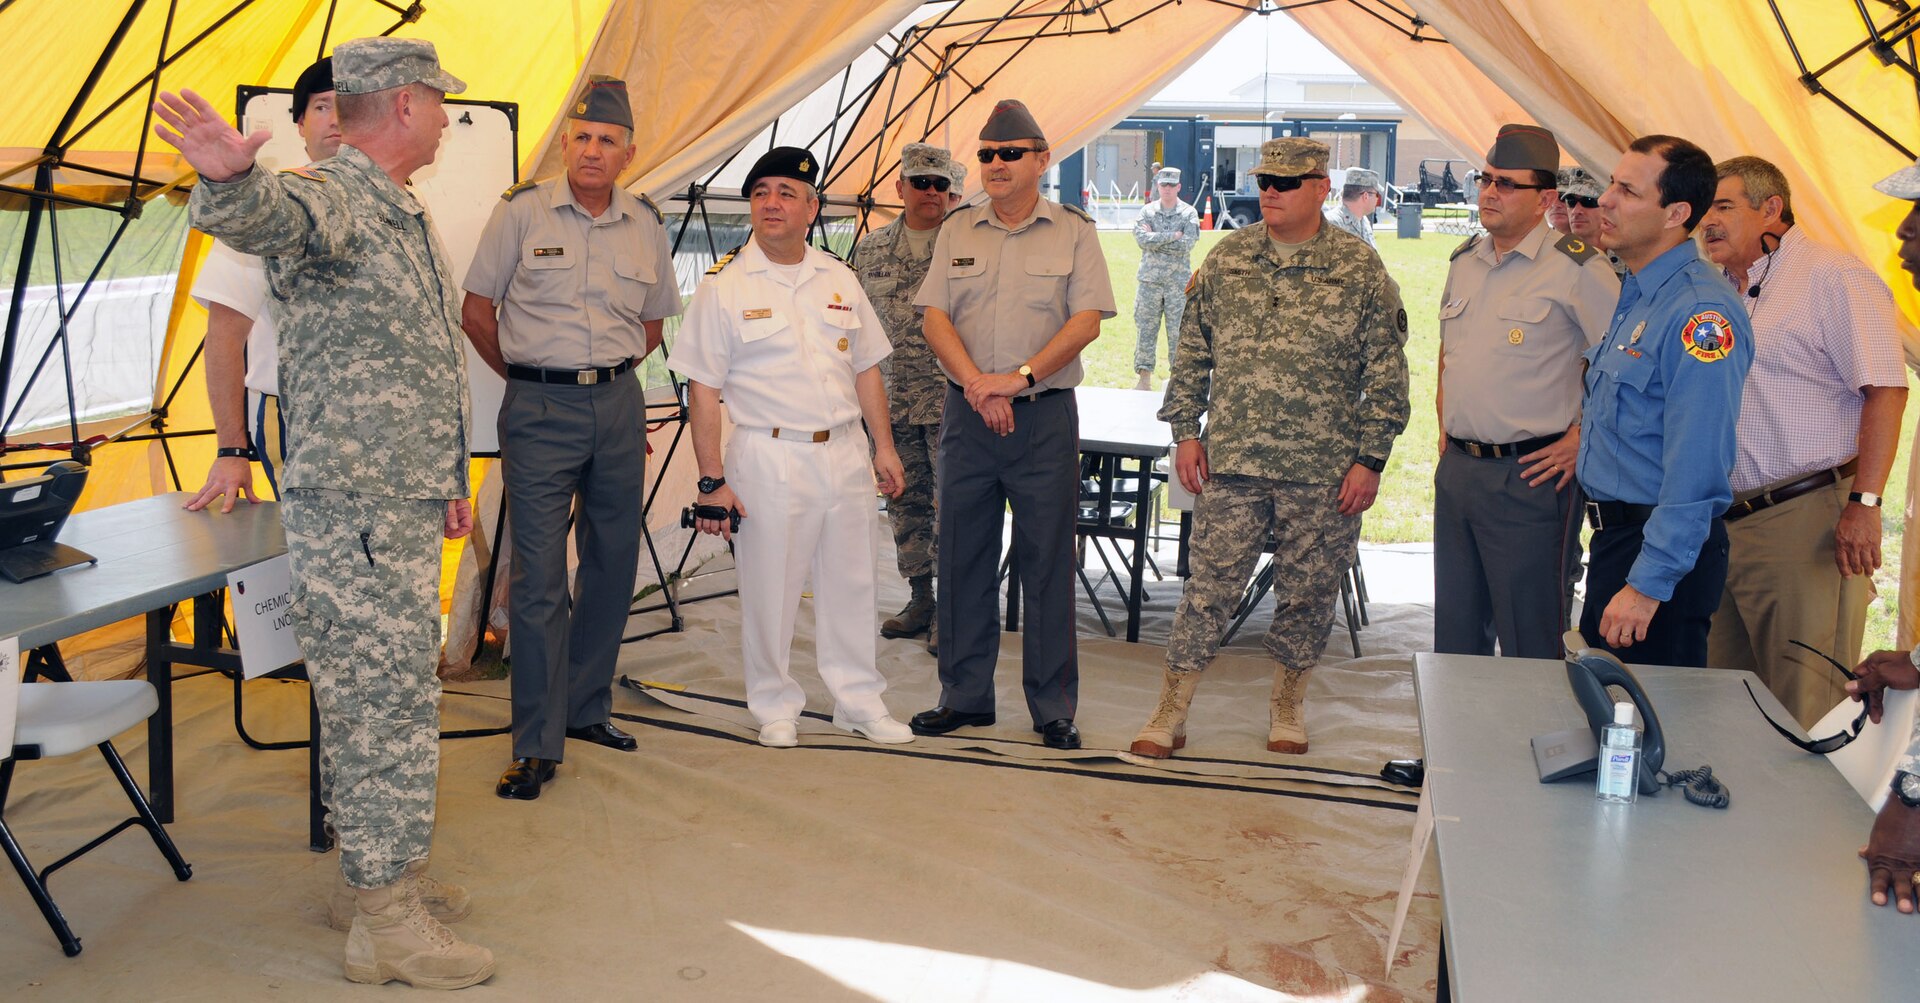 Members of the Chilean armed forces visit Joint Task Force 71 (Maneuver Enhancement Brigade) July 24 at the Round Rock Armed Forces Reserve Center. Emergency response was the theme for the visit, as the Minuteman Brigade offered a tour to demonstrate the capabilities and interagency relationships inherent to the Homeland Response Force mission.